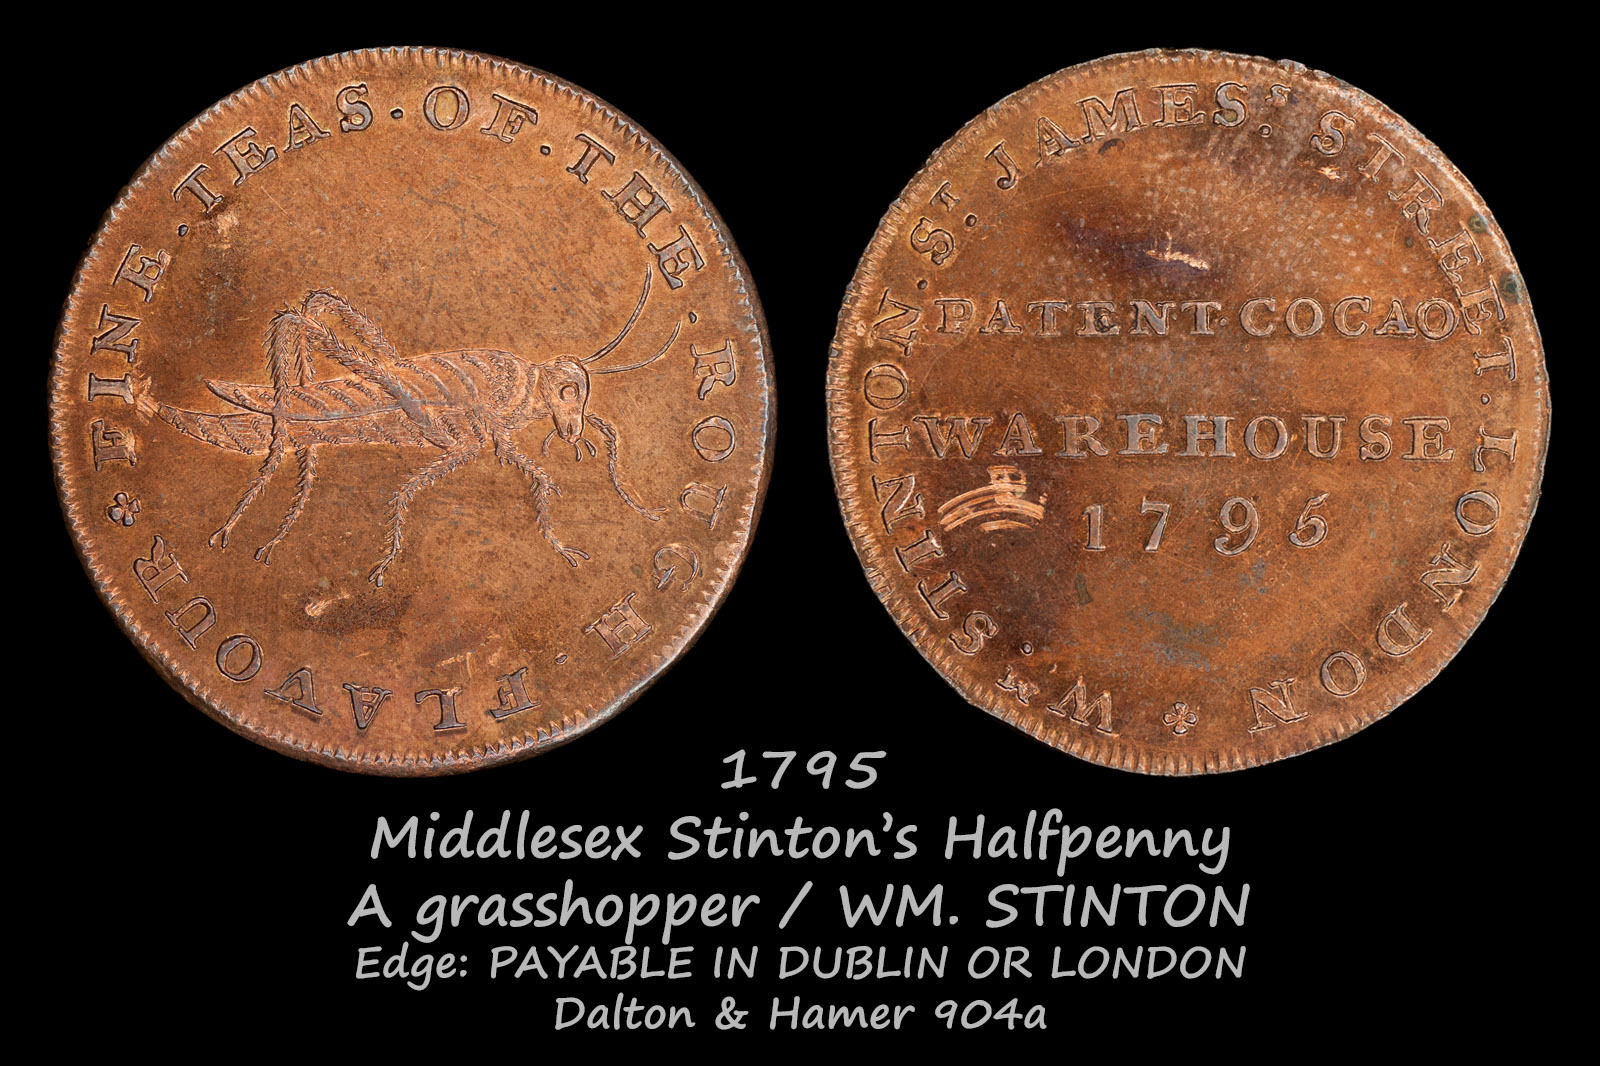 Middlesex Stinton’s Halfpenny D&H904a